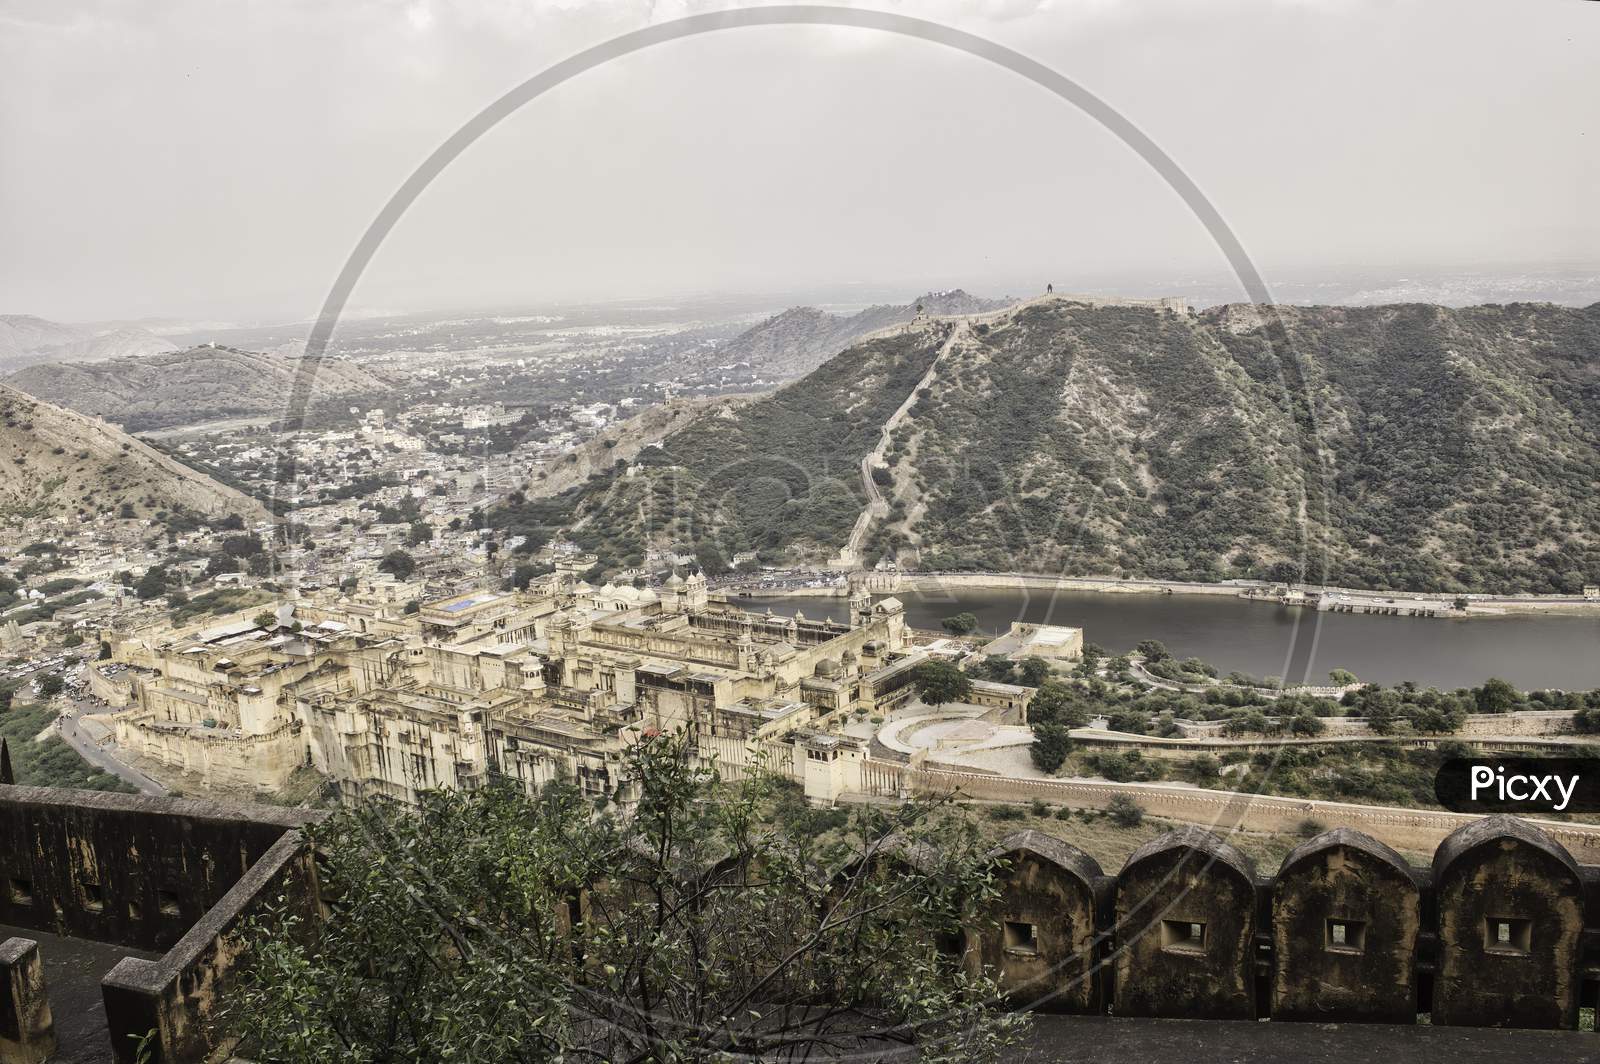 Wide Angle View Of Lake And City From A Fort Located In Jaipur City Of Rajasthan State In India